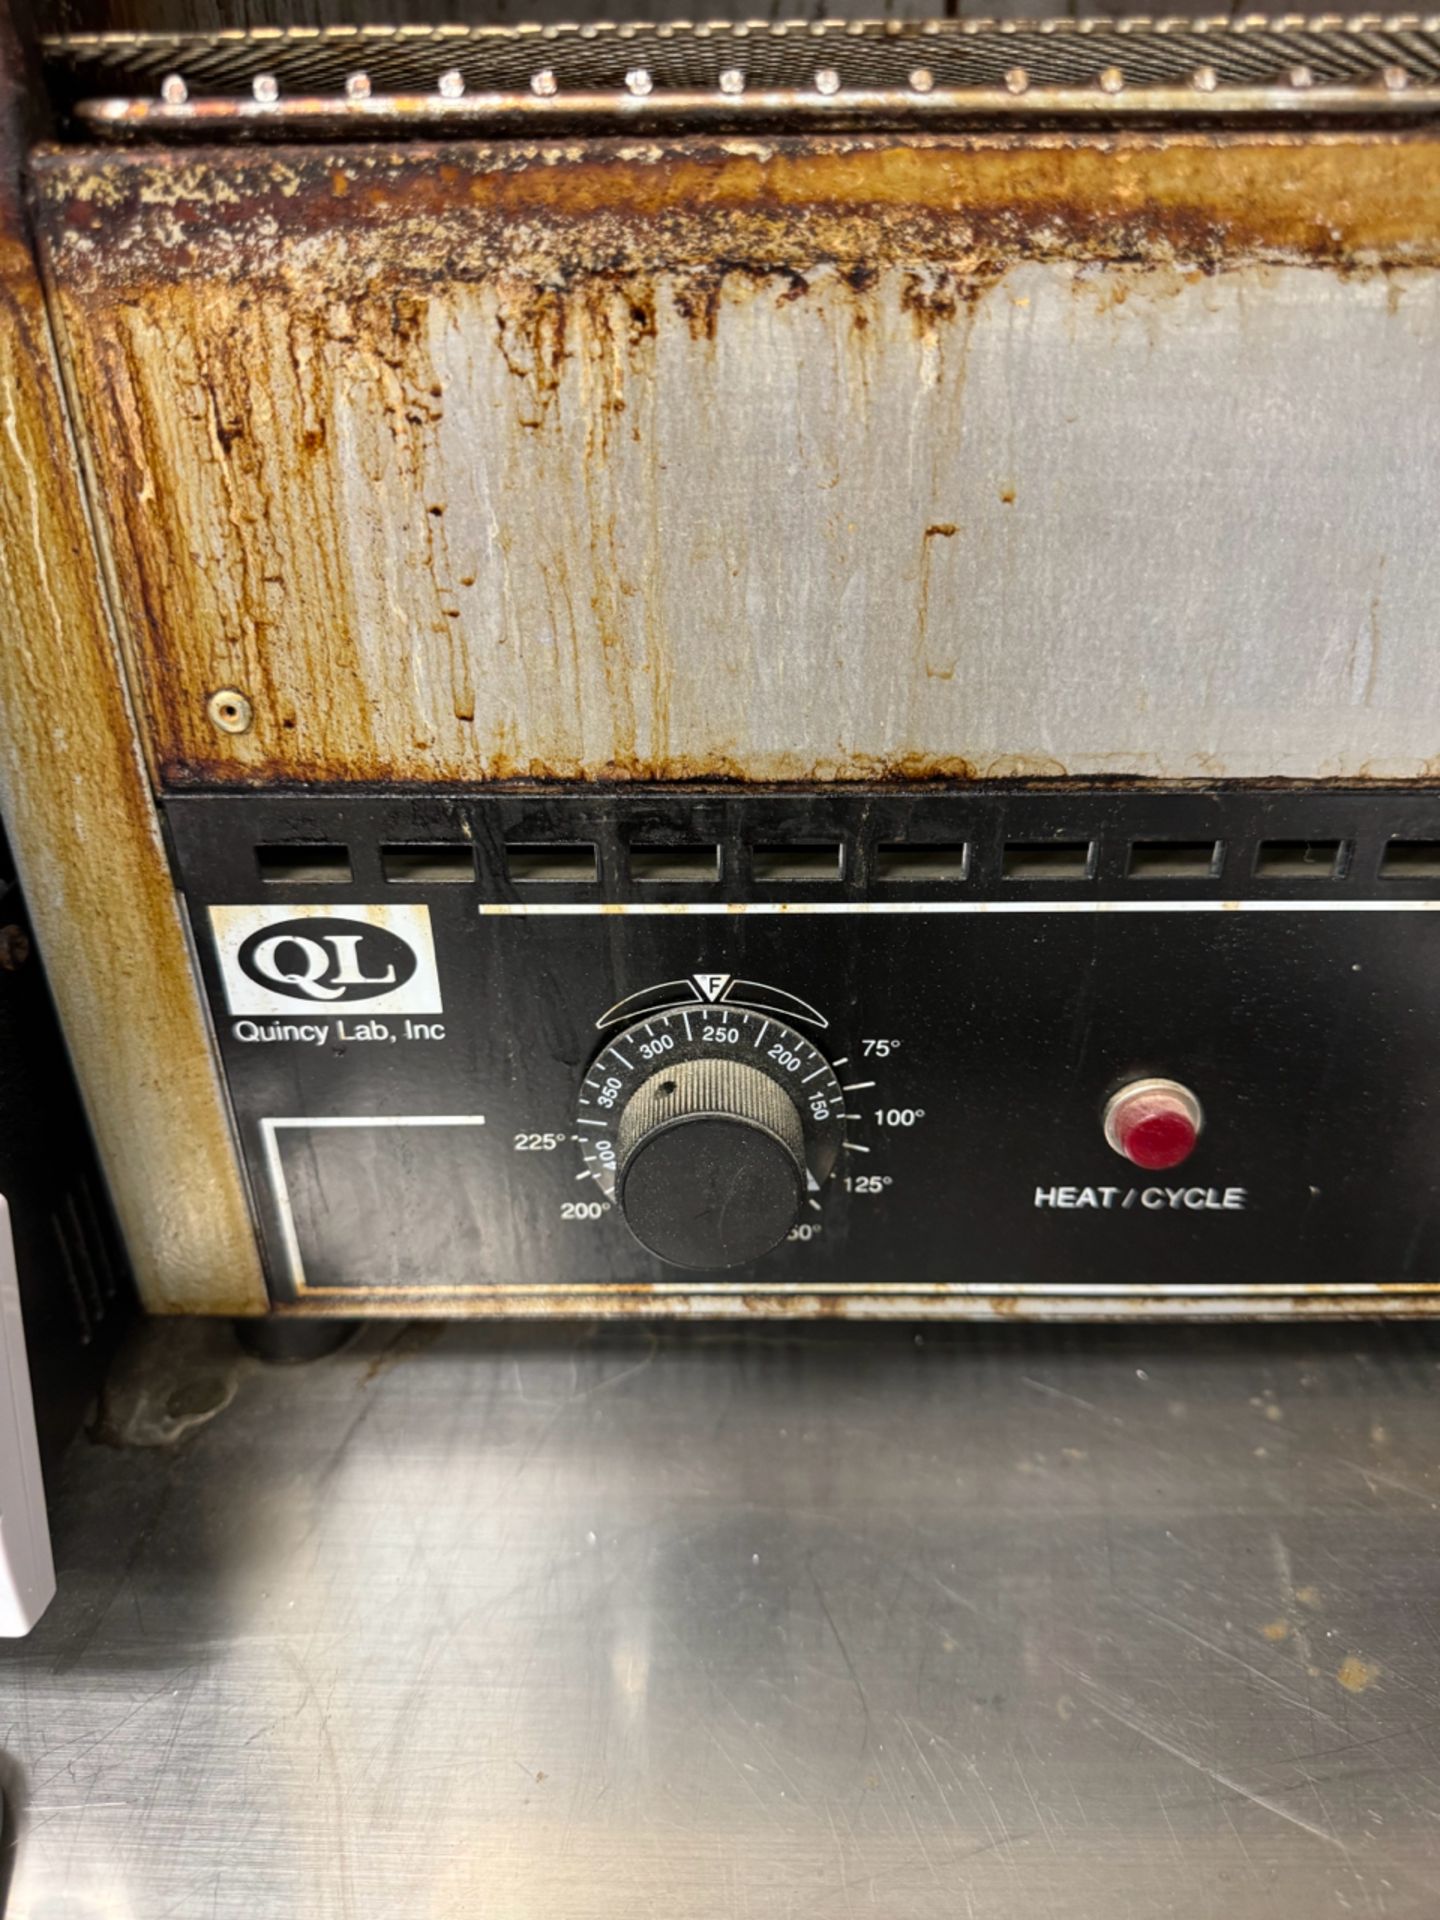 Quincy Lab QL Oven - Image 3 of 4